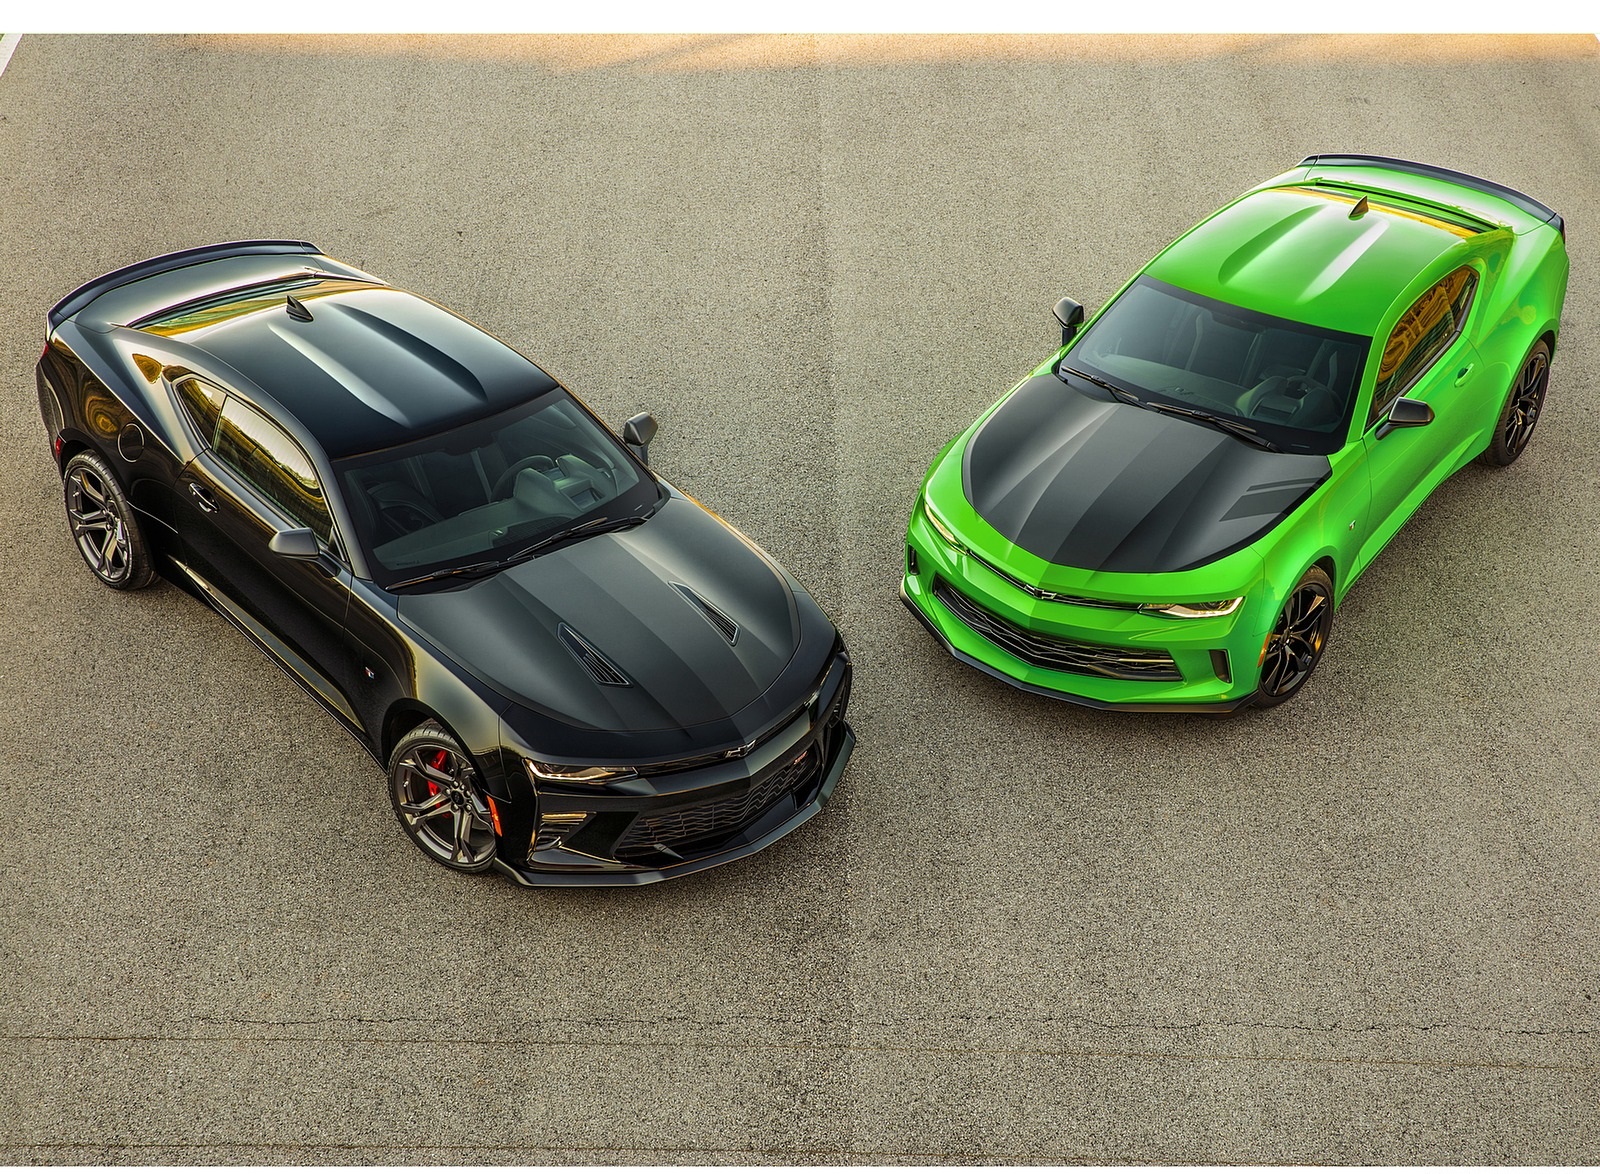 2017 Chevrolet Camaro 1LE Green and Camaro SS 1LE Black with Performance Packages Top Wallpapers (7)